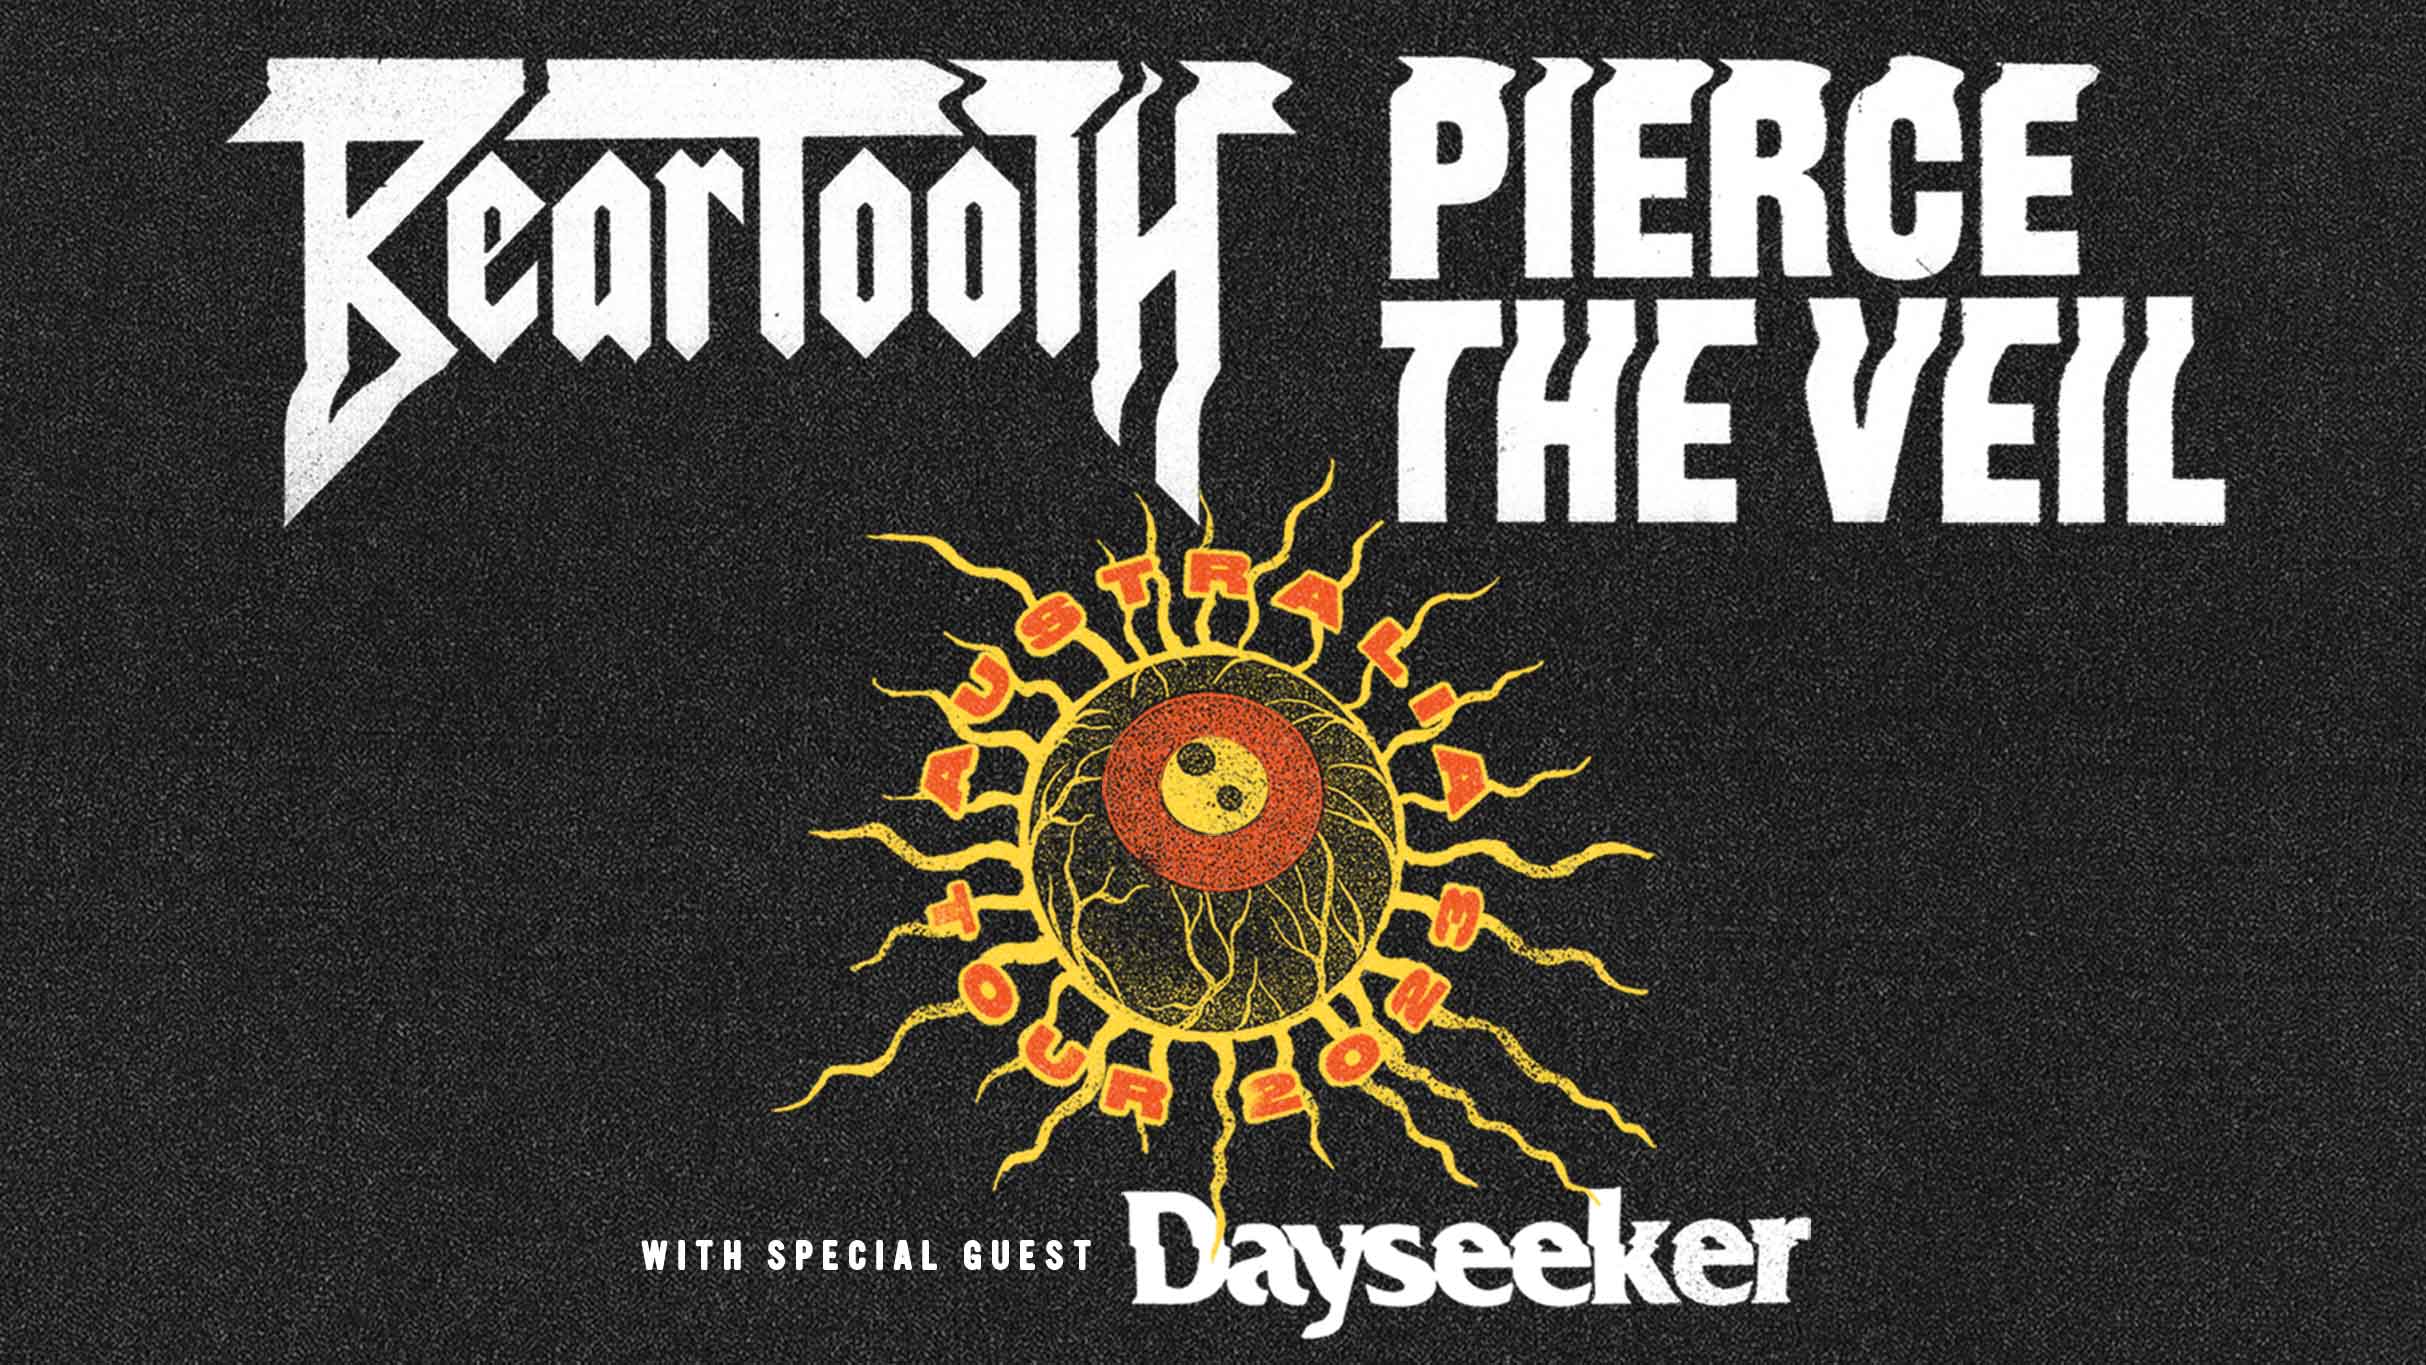 Image used with permission from Ticketmaster | Beartooth and Pierce The Veil tickets